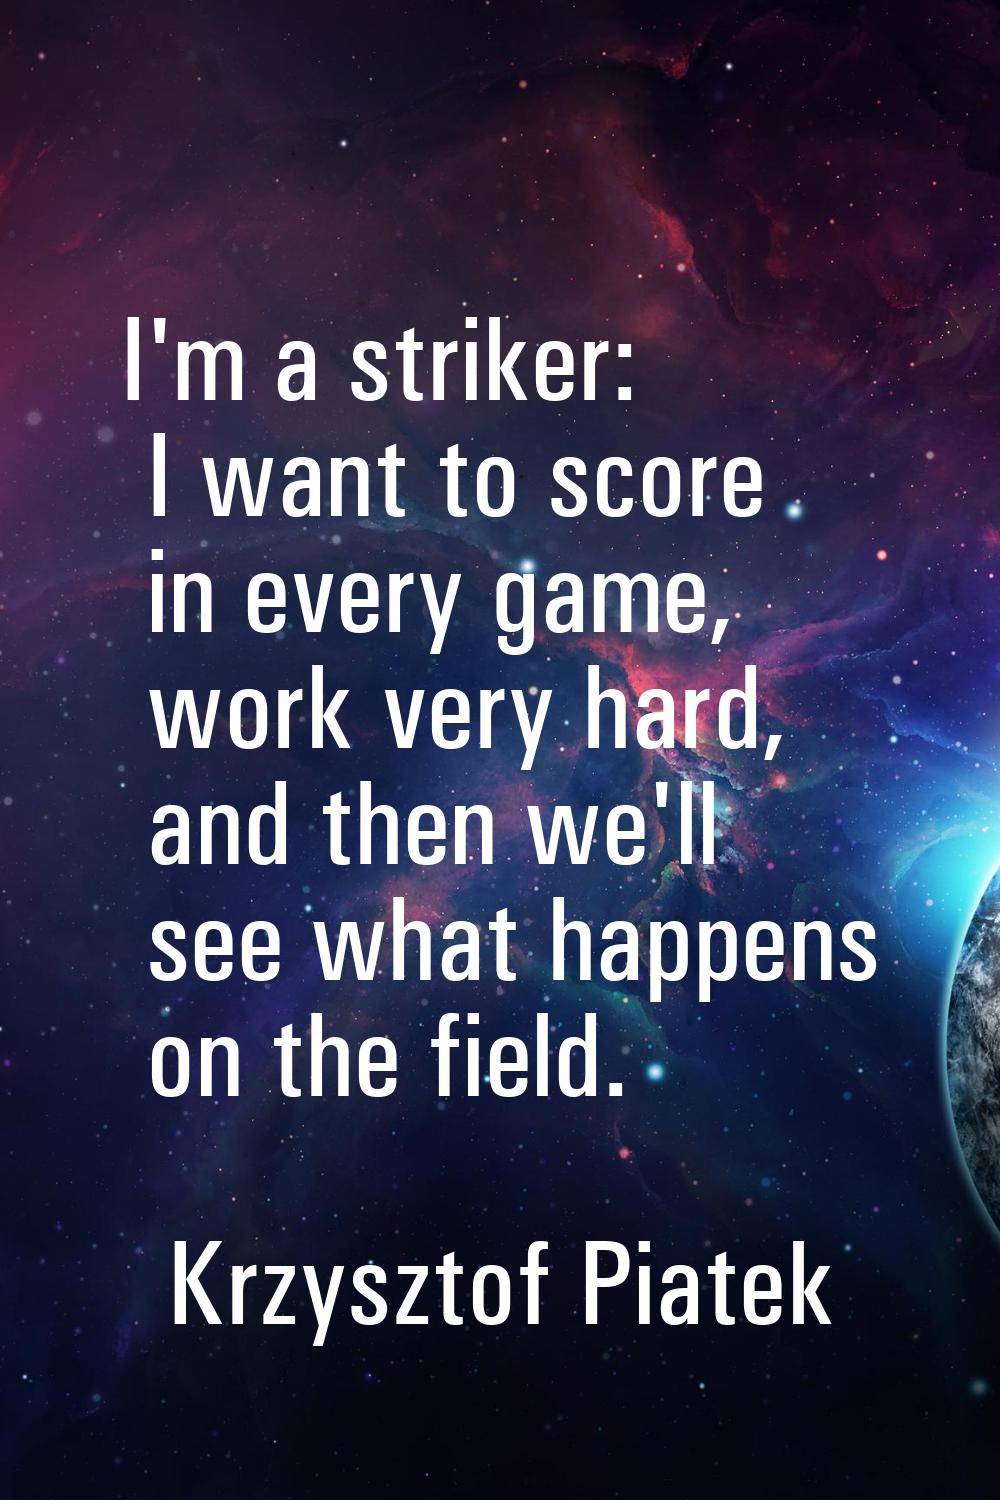 I'm a striker: I want to score in every game, work very hard, and then we'll see what happens on th